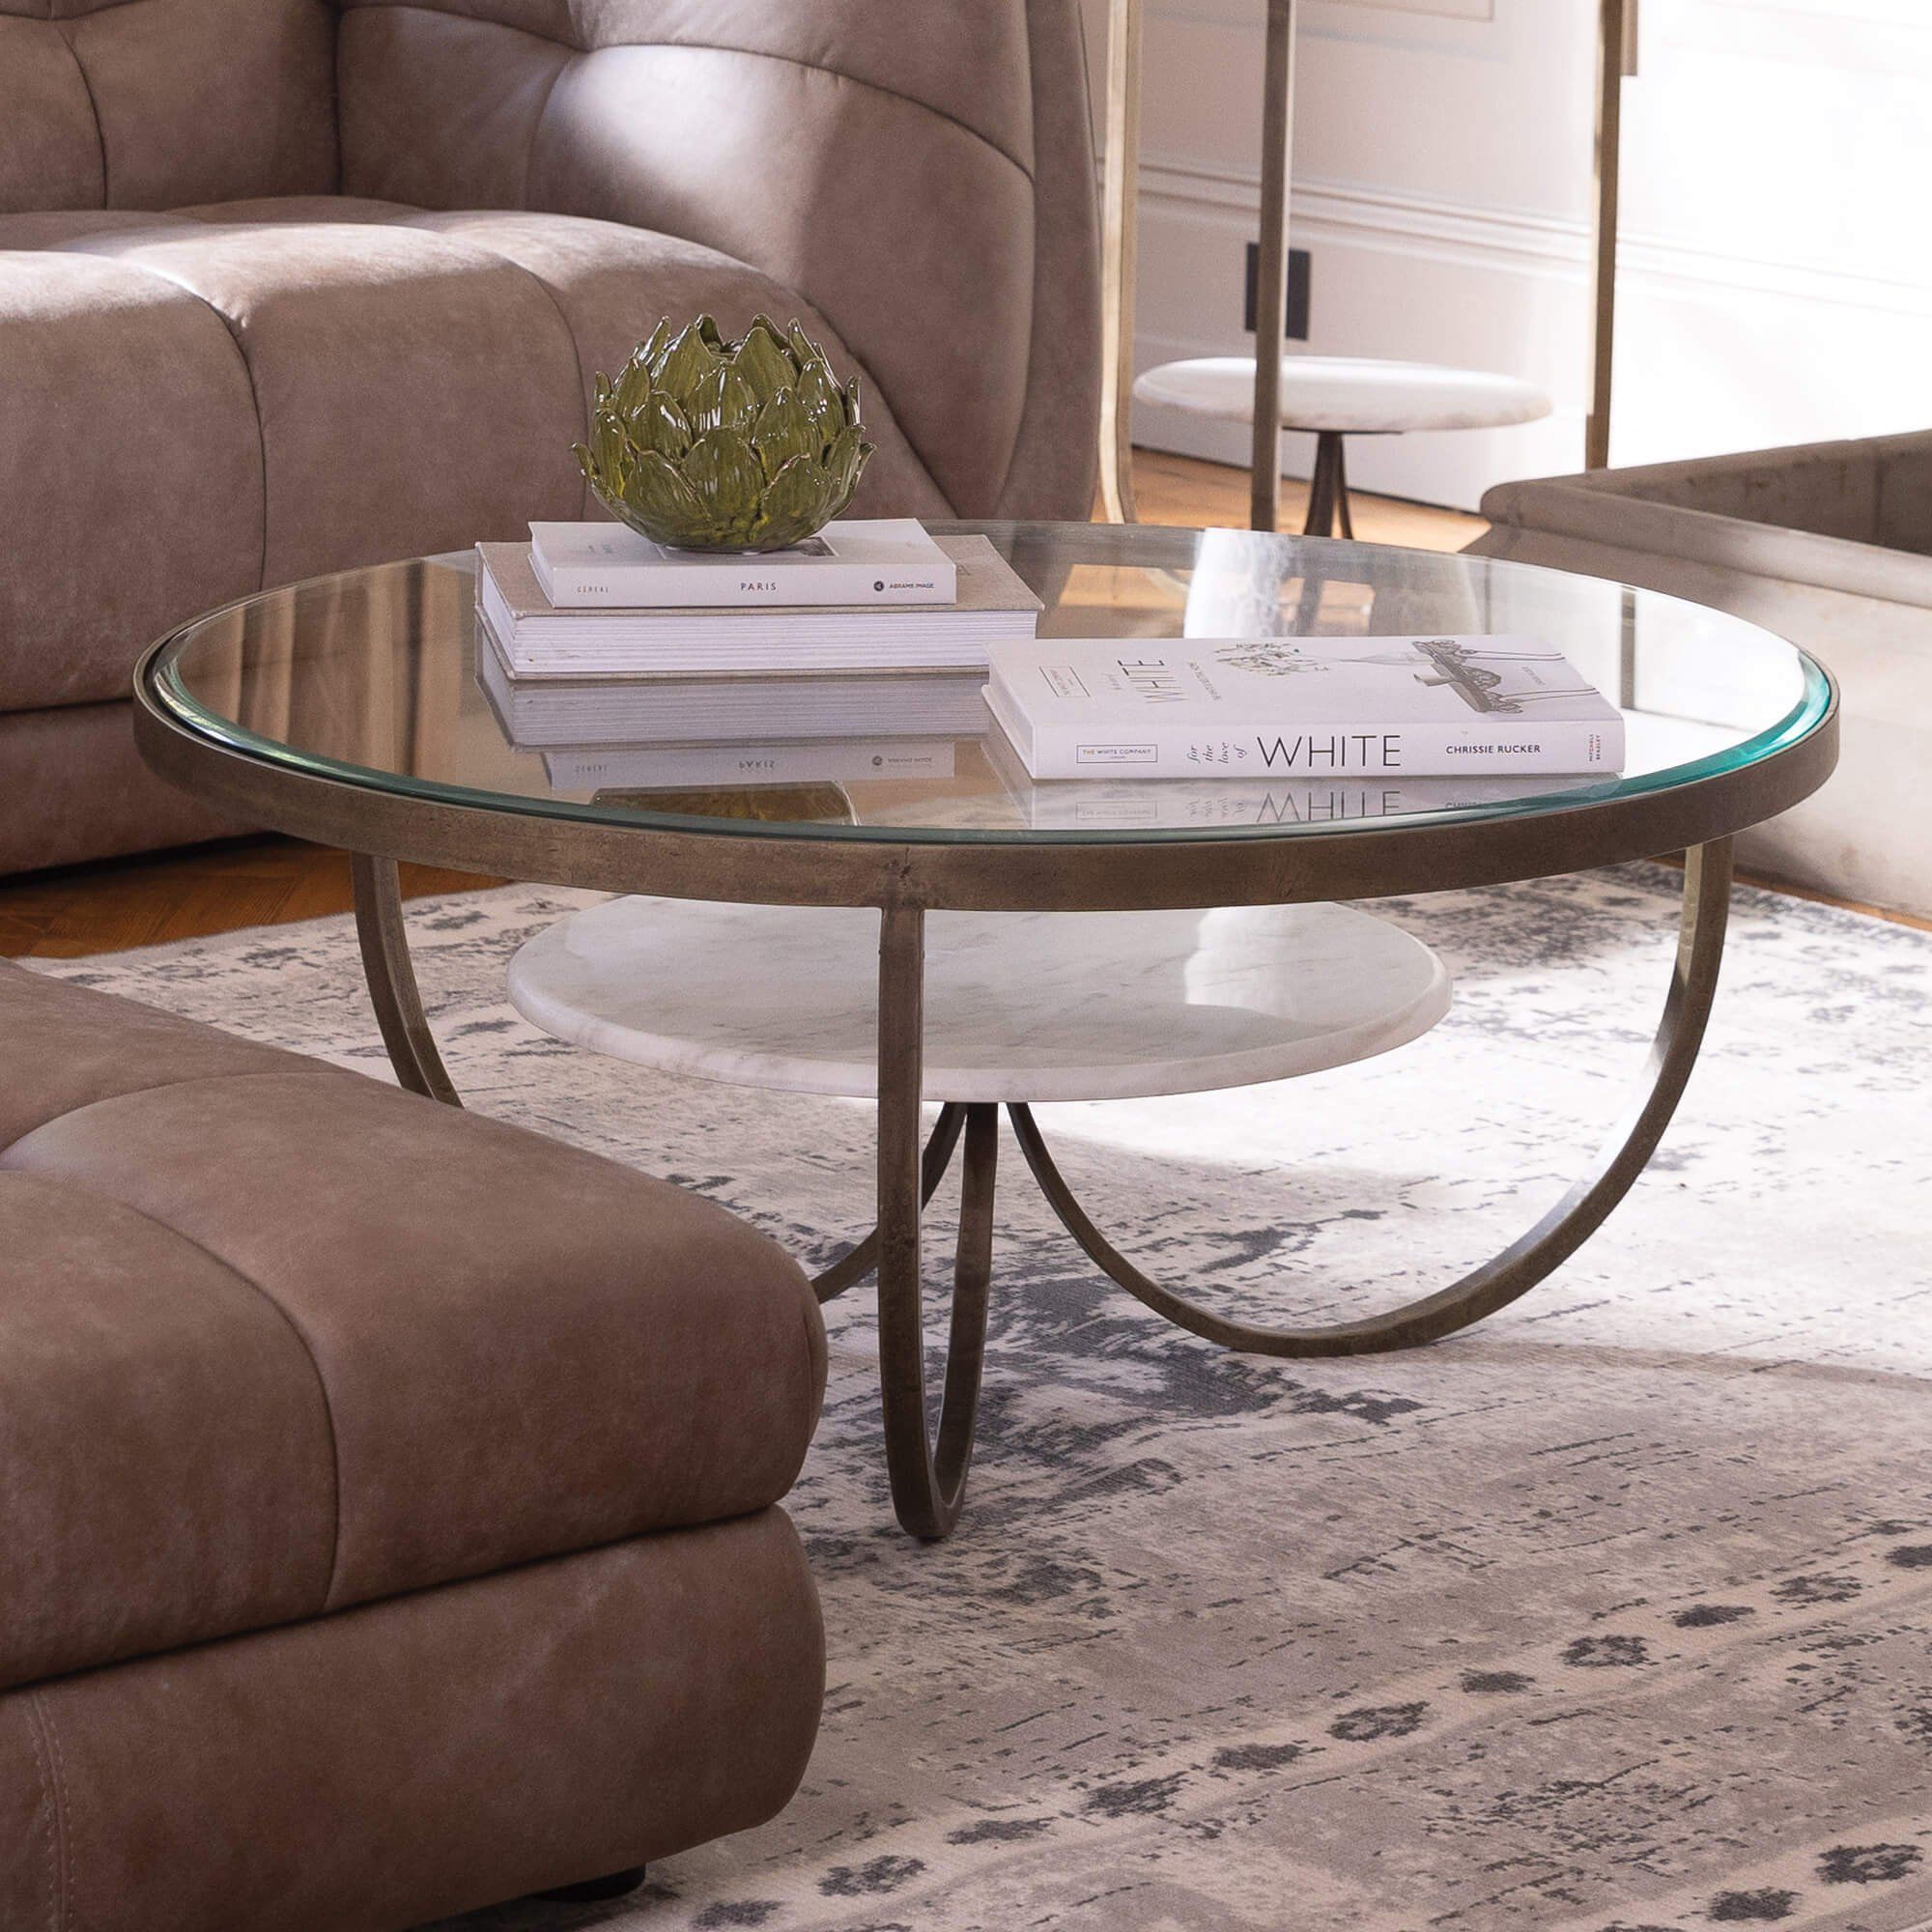 Nebu Marble & Glass Coffee Table Throughout Glass Coffee Tables With Lower Shelves (View 8 of 15)